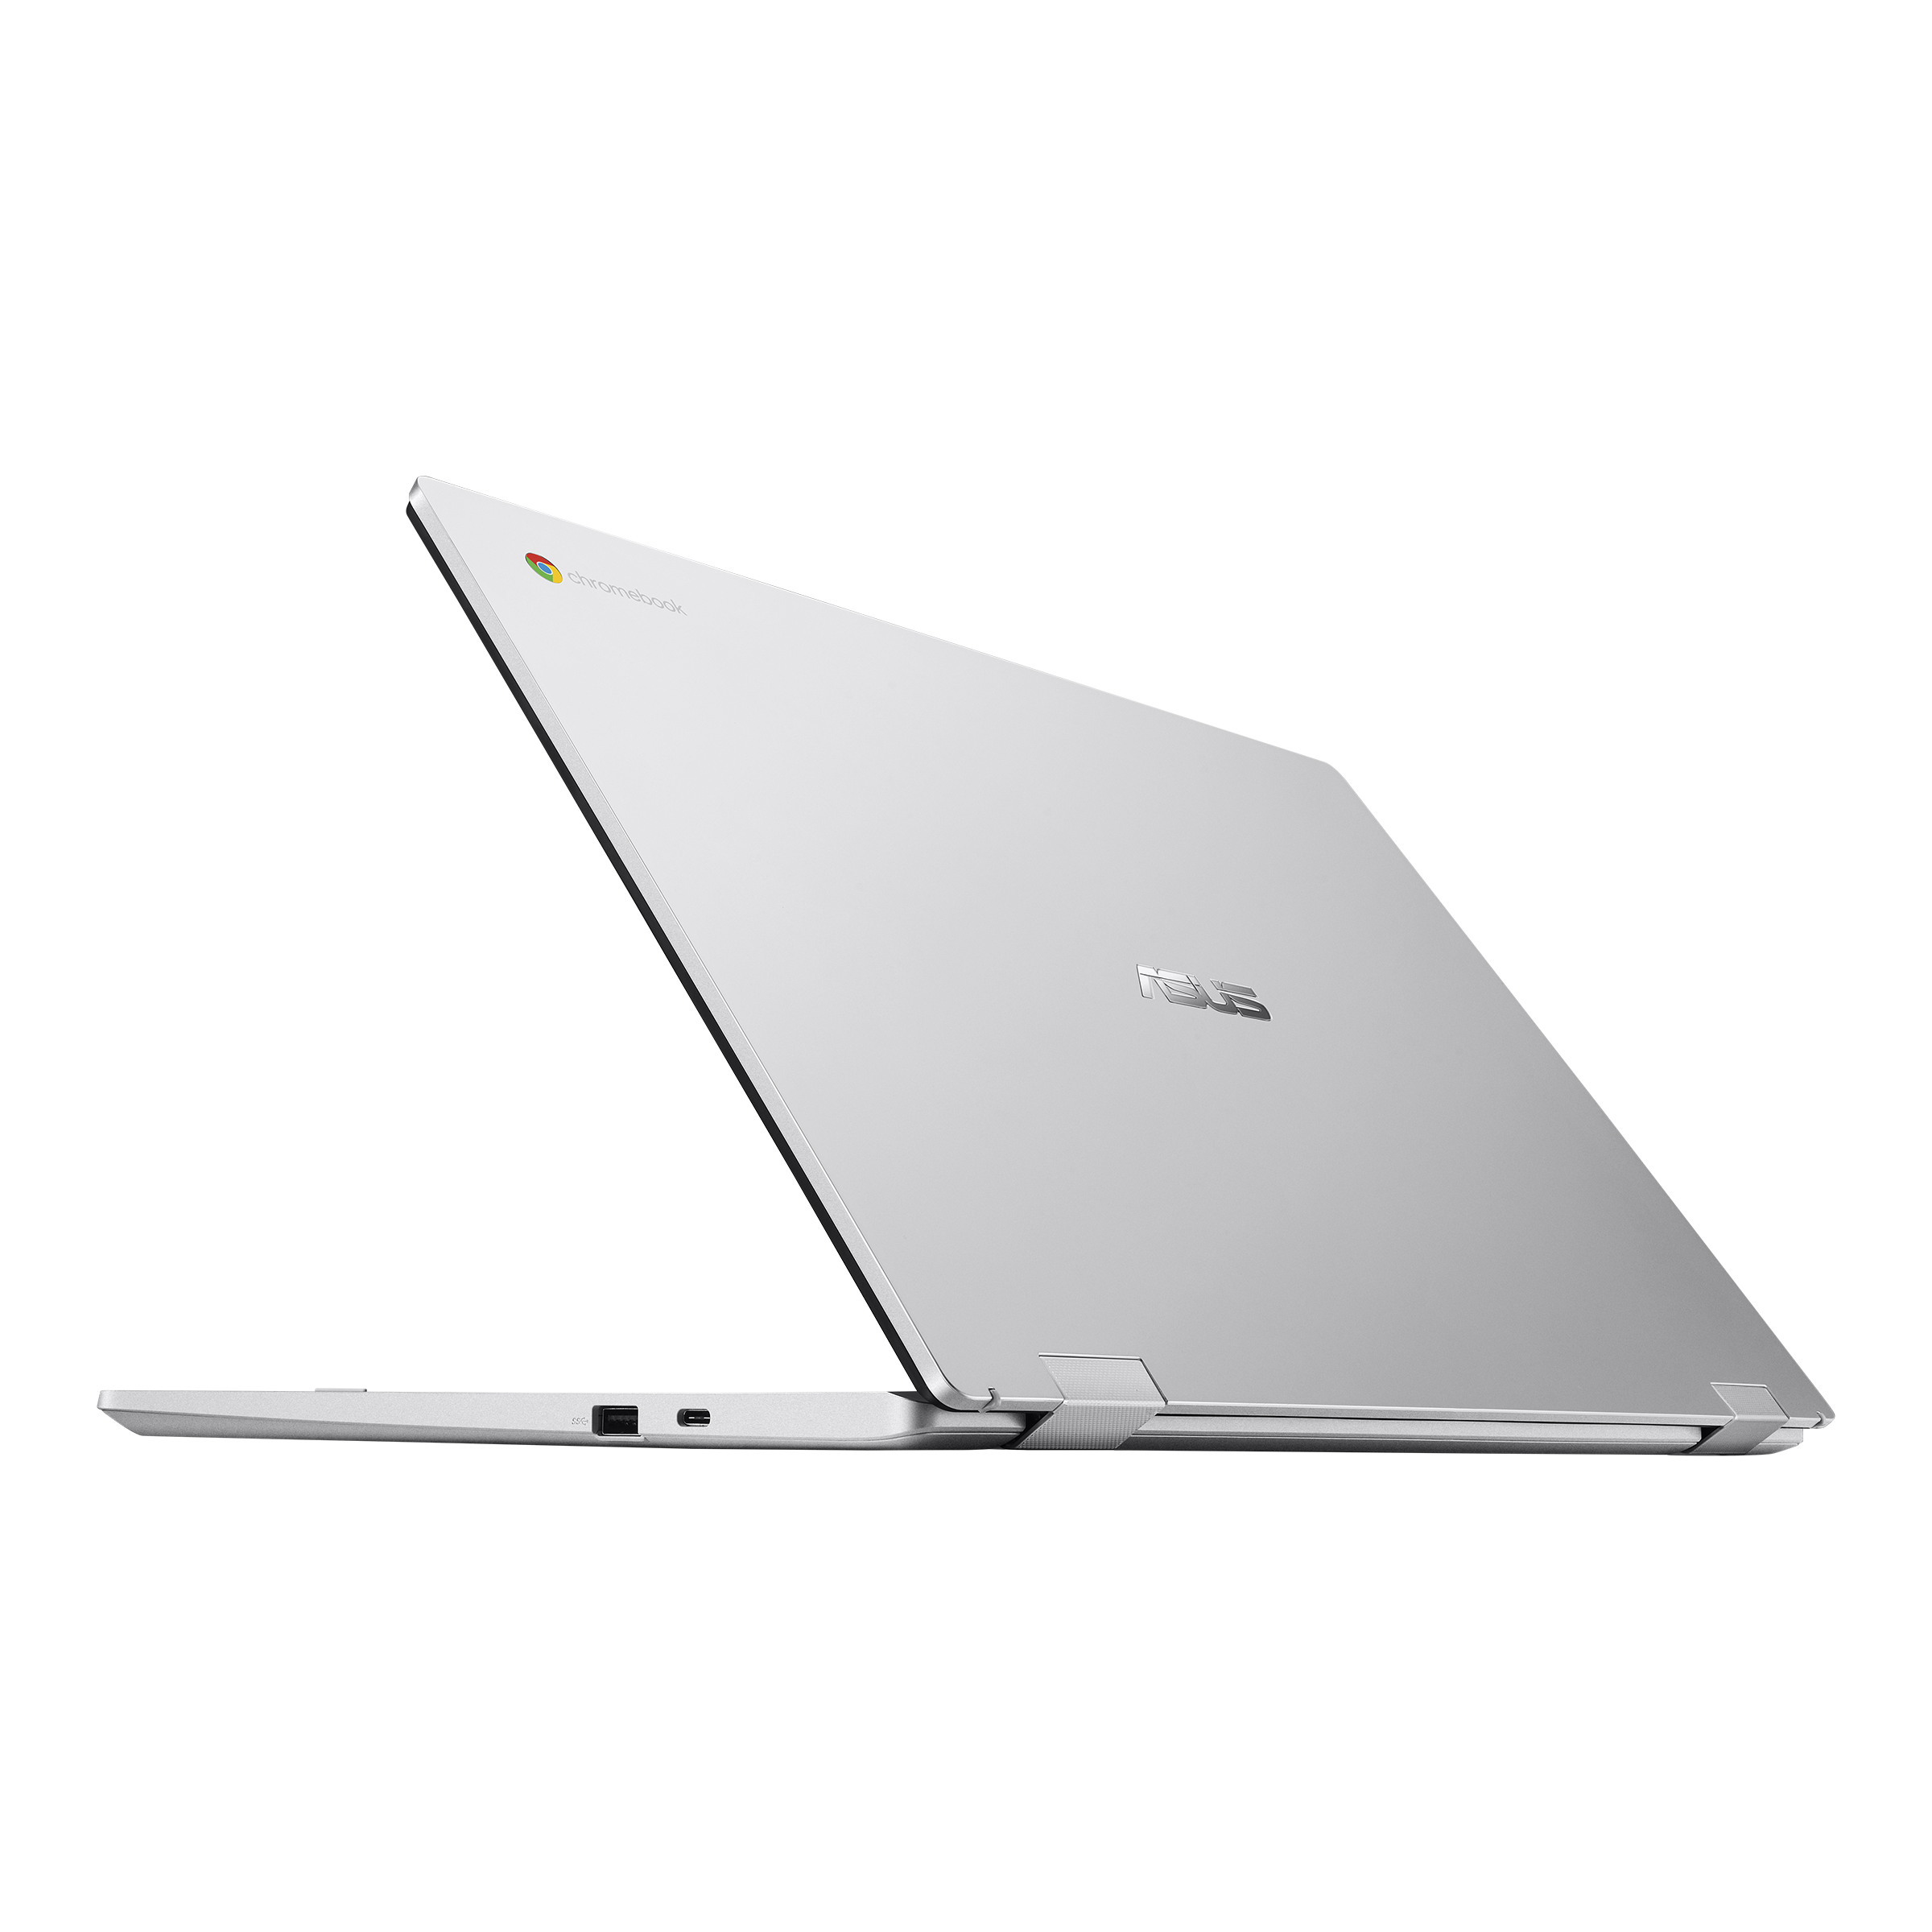 ASUS Chromebook CX1 (CX1700)｜Laptops For Home｜ASUS Global